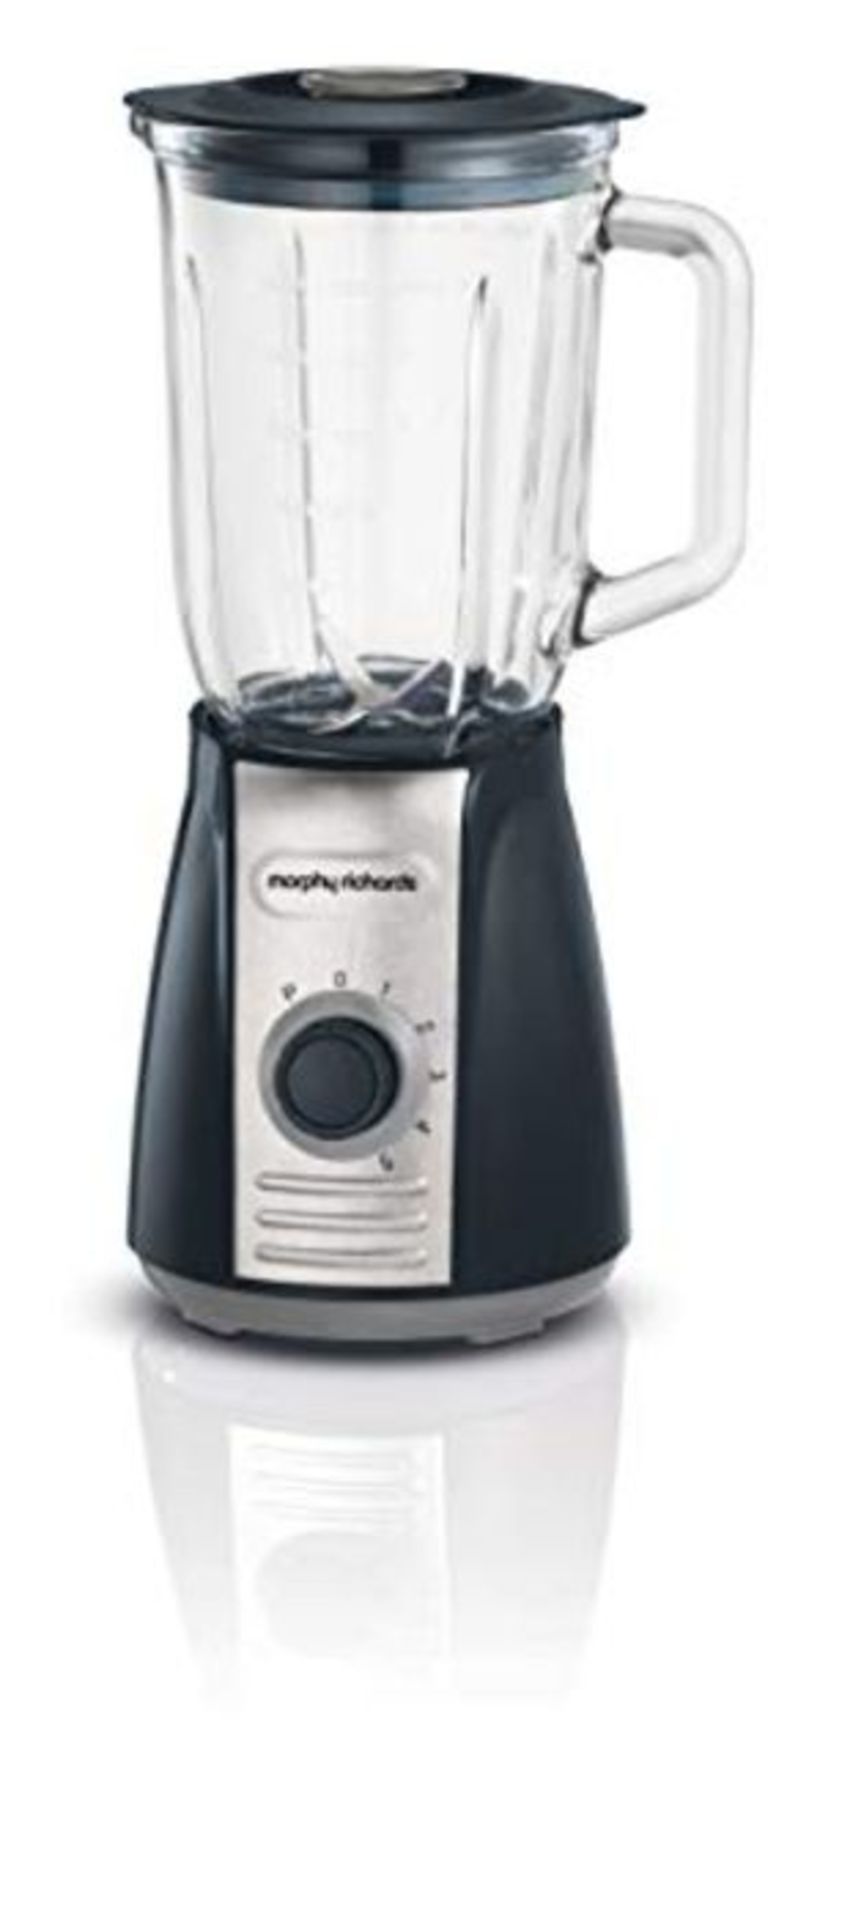 Morphy Richards 403010 Jug Blender with Ice Crusher Blades Inspire Kitchen Confidence,